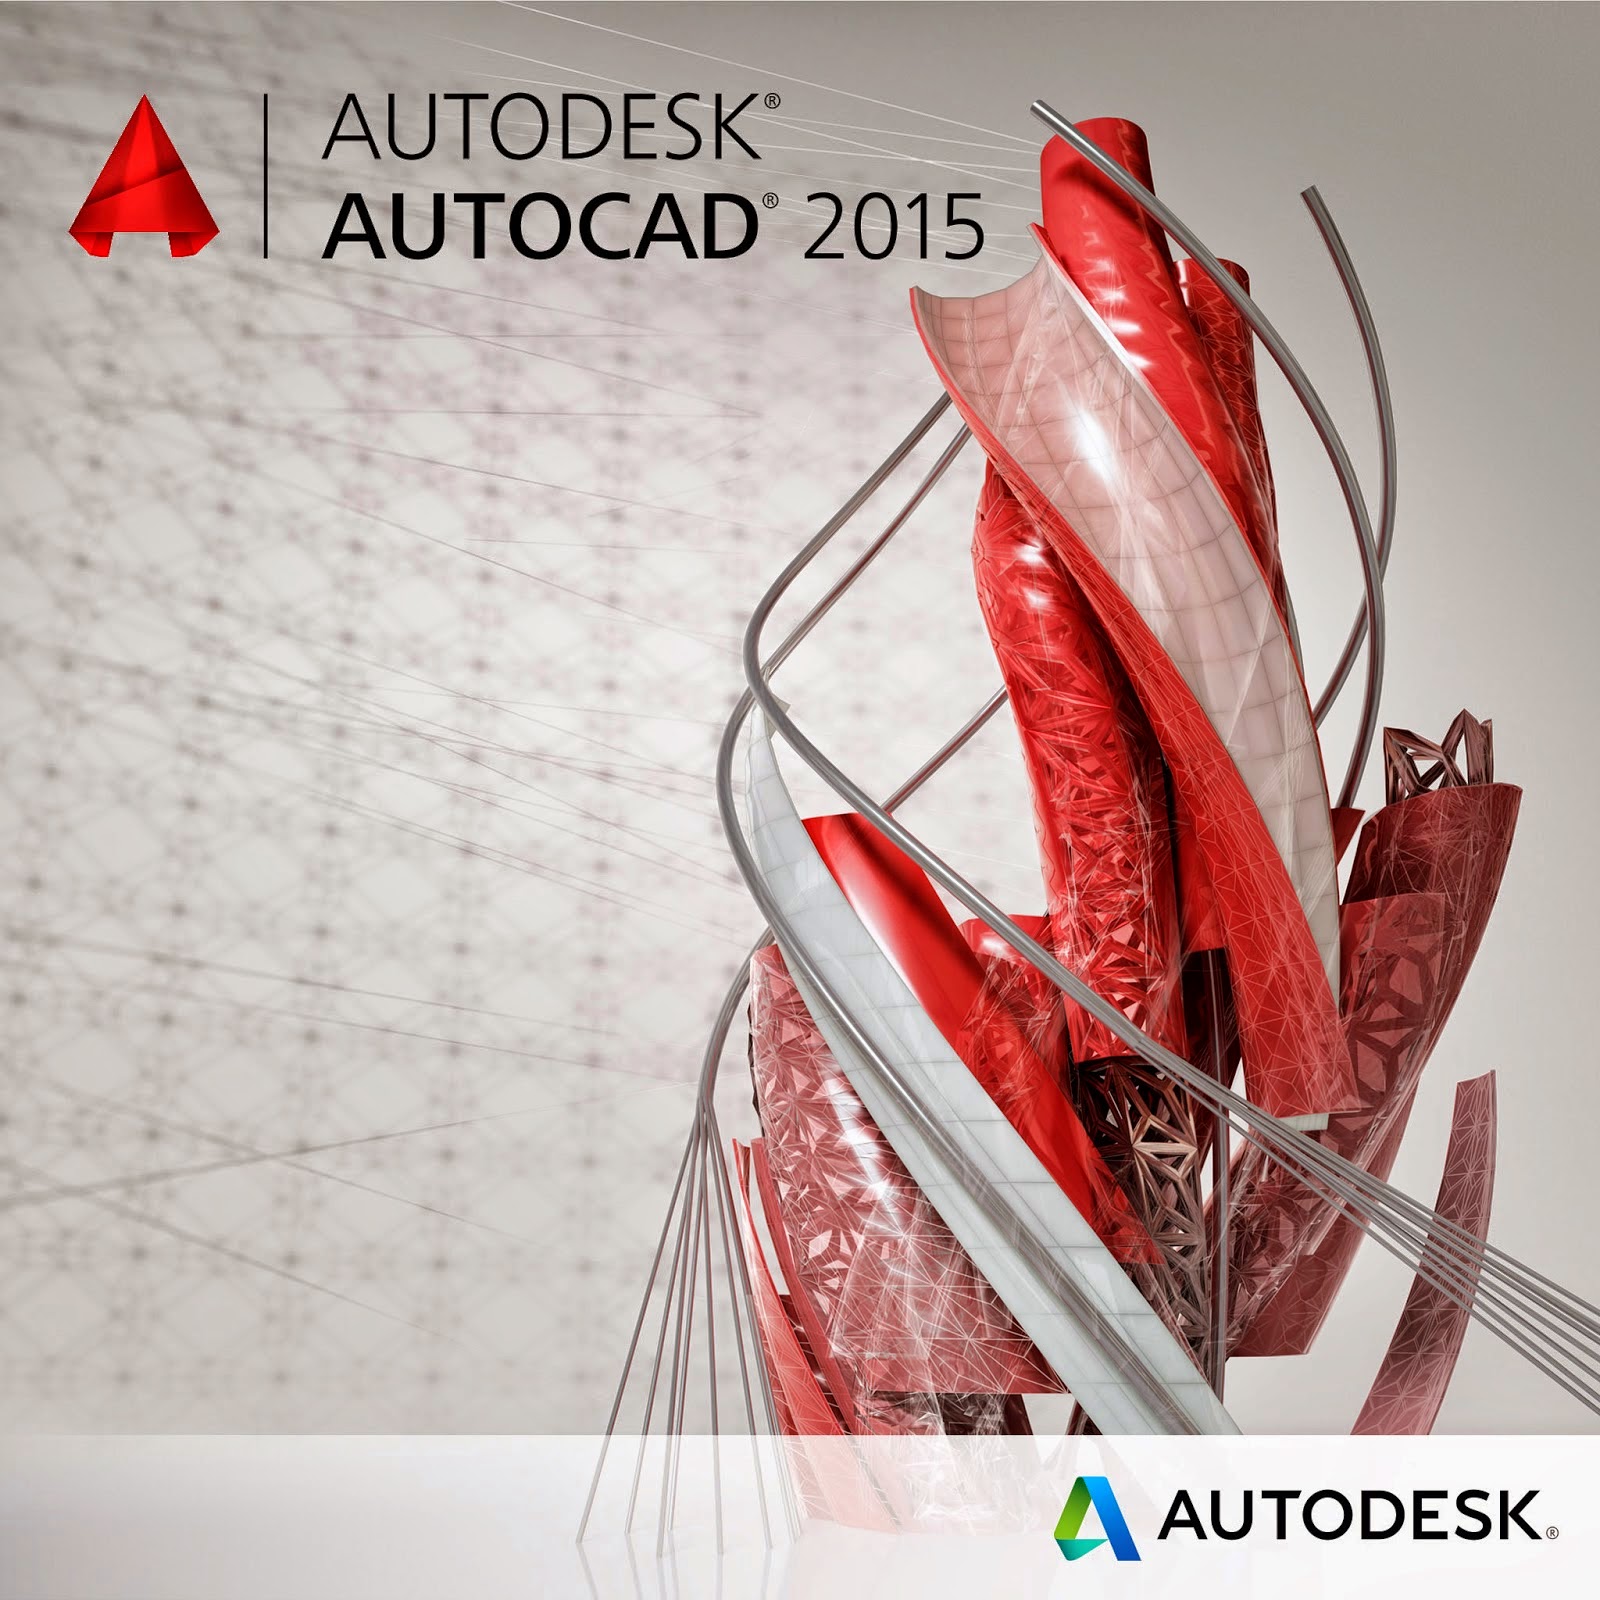 AutoCAD 2020 Free Download Full Version For Windows 10/8/7